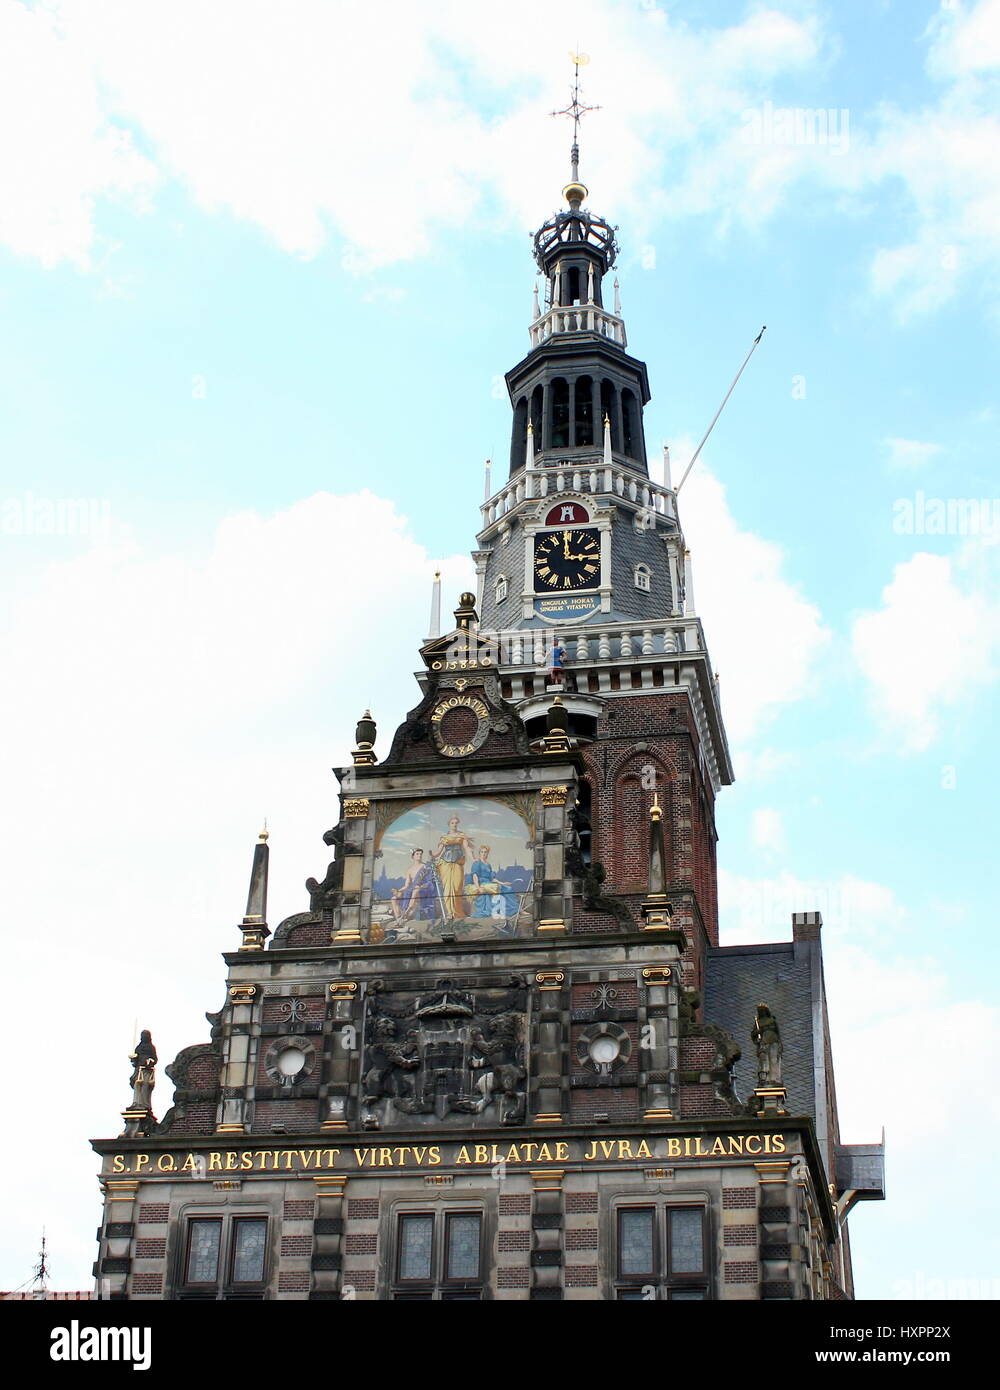 Iconic 17th century Waag (Weigh house) at Waagplein square in Alkmaar, The Netherlands. One of the very few remaining weighing houses still in use Stock Photo